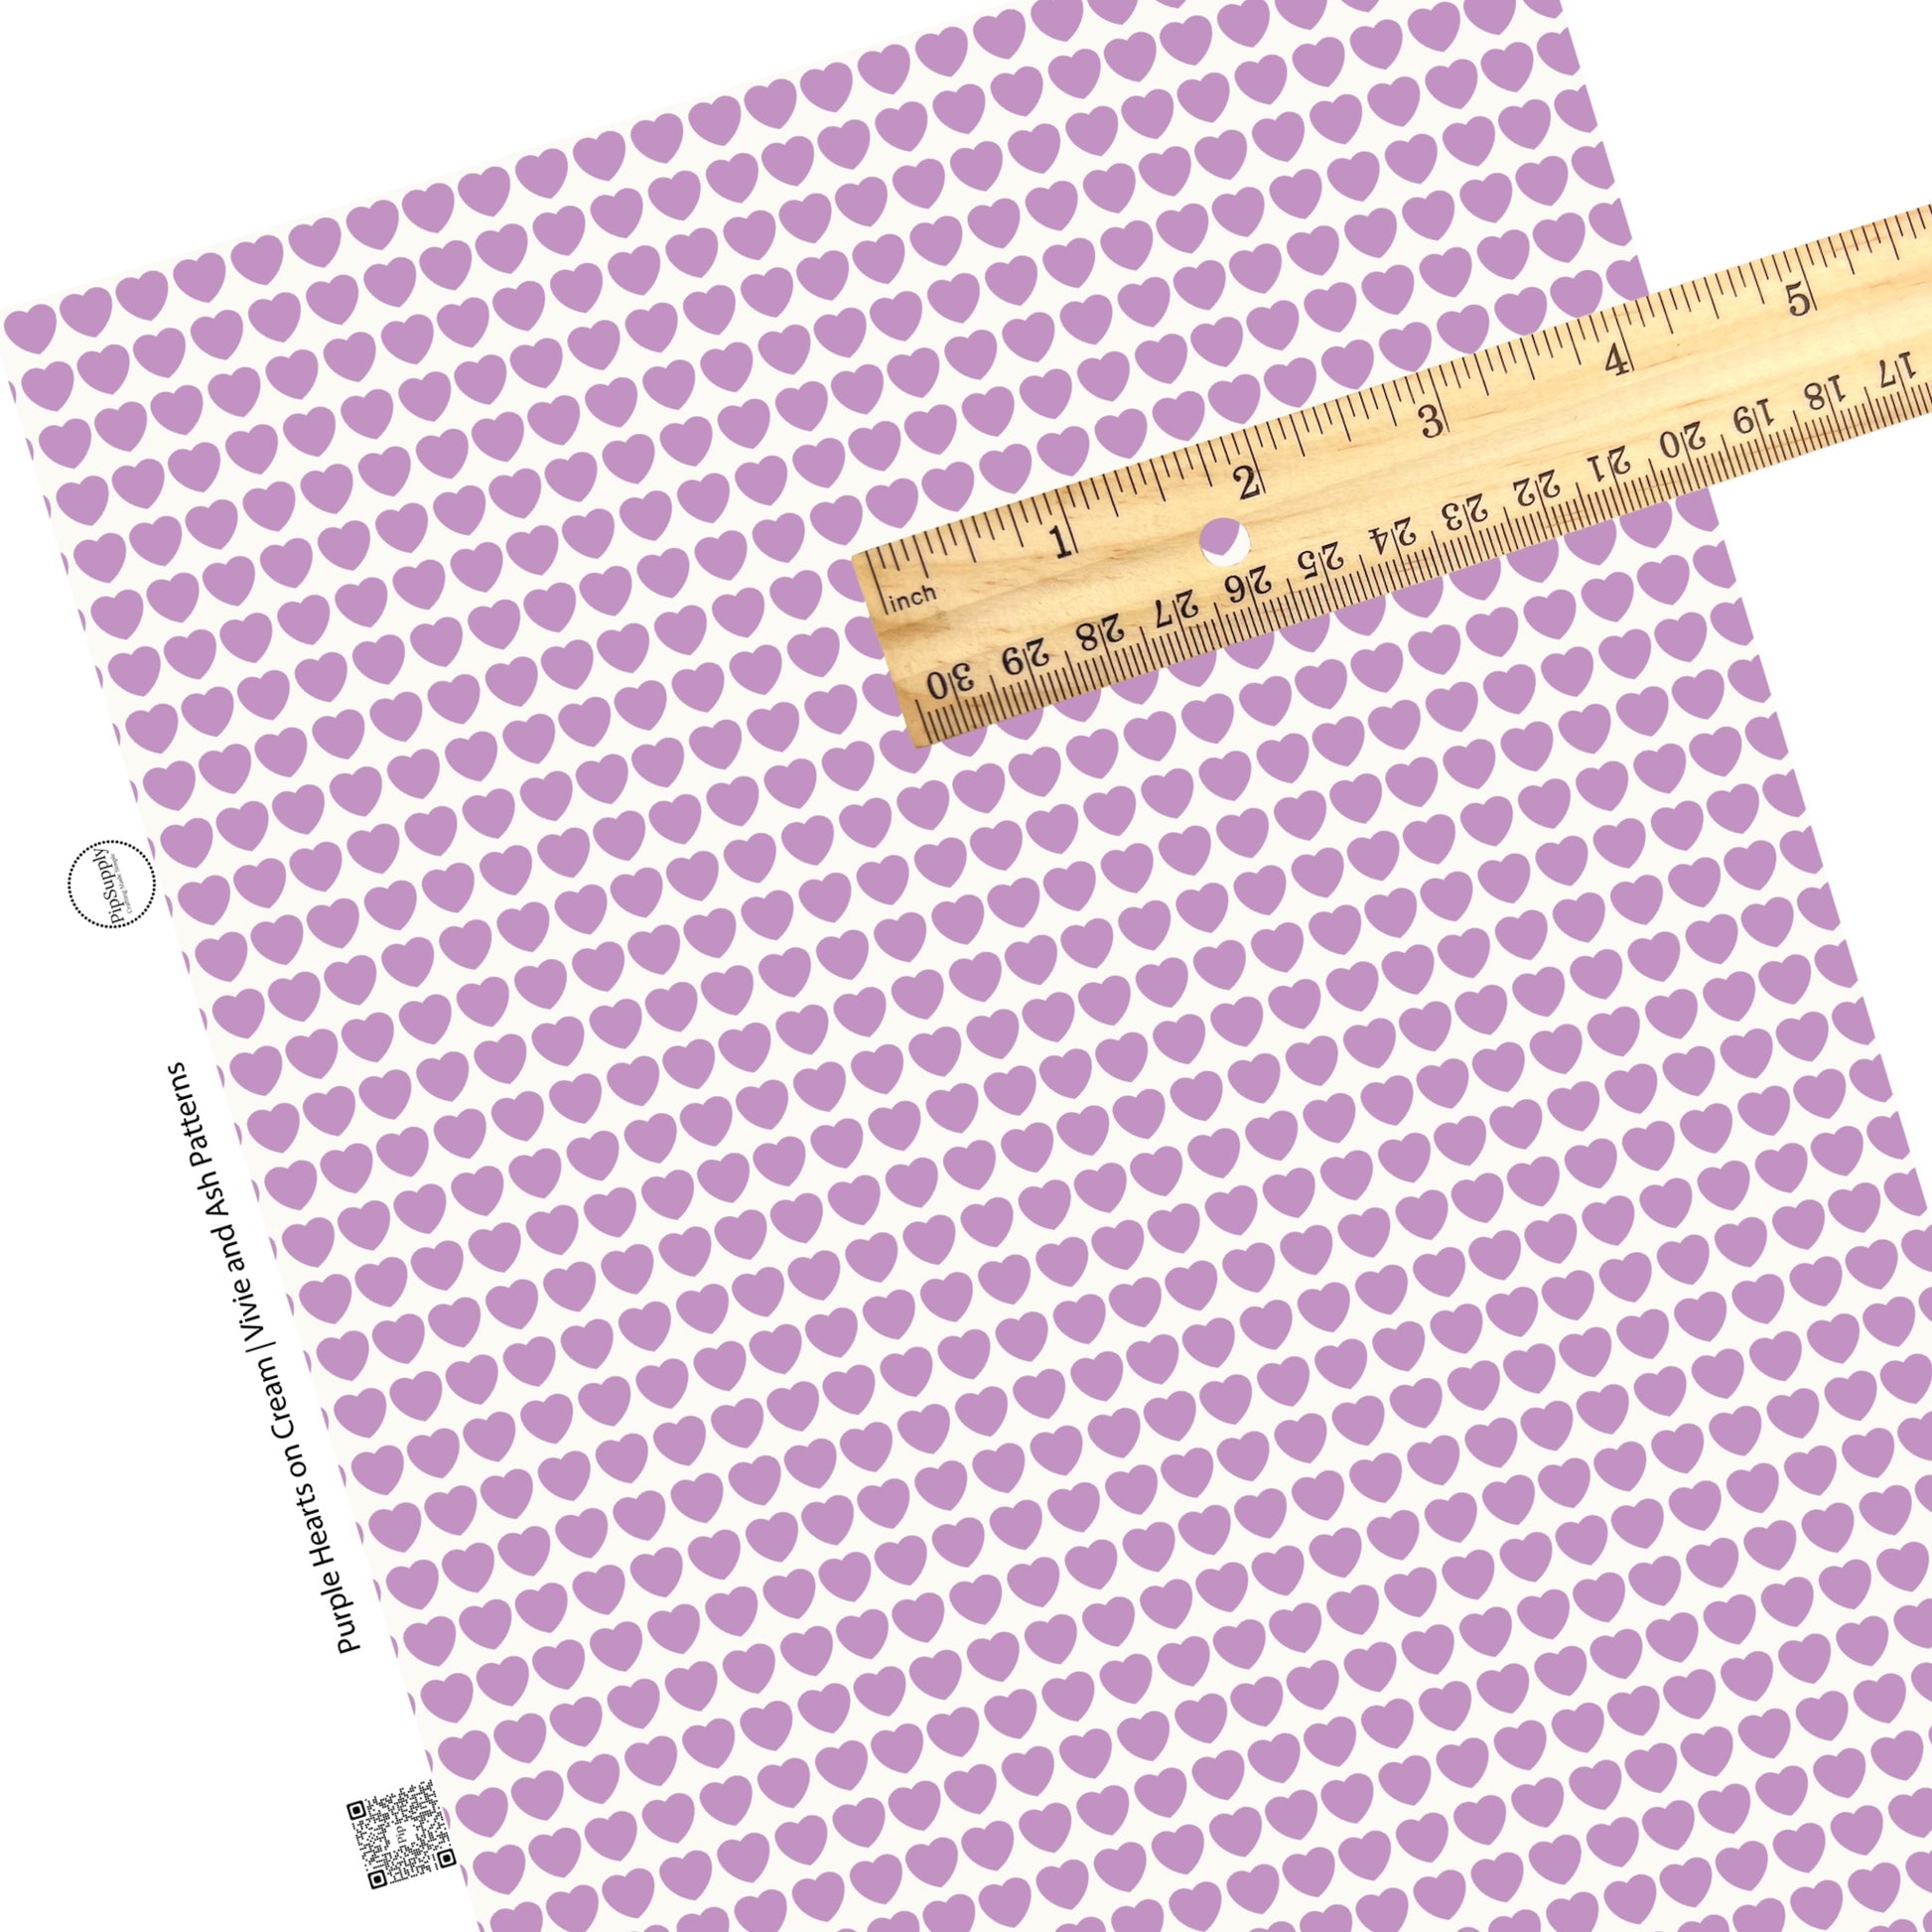 These Valentine's pattern themed faux leather sheets contain the following design elements: purple hearts on cream. Our CPSIA compliant faux leather sheets or rolls can be used for all types of crafting projects.